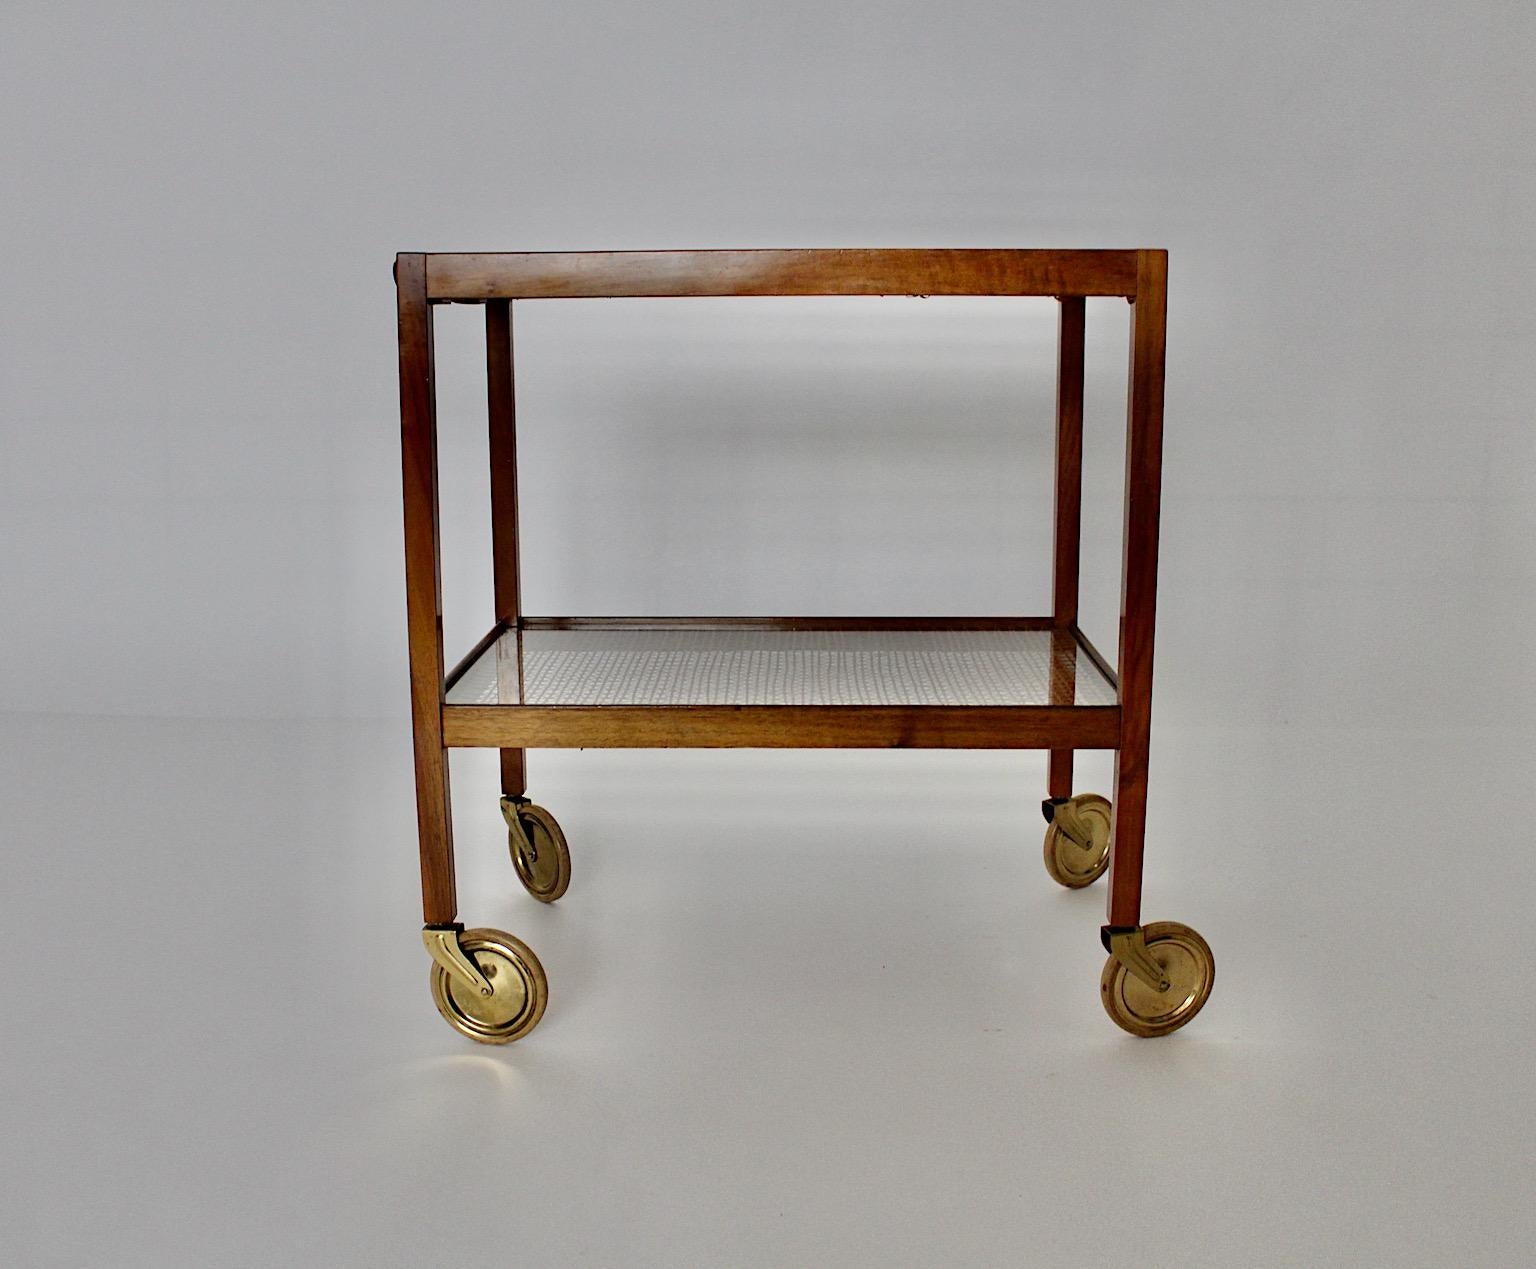 Art Deco vintage bar cart or serving table wheel supported from walnut and brass, the design is attributed to Julius Jirasek for Werkstätte Hagenauer circa 1935 Vienna.
A fabulous organic bar cart or serving table from walnut in stunning warm color